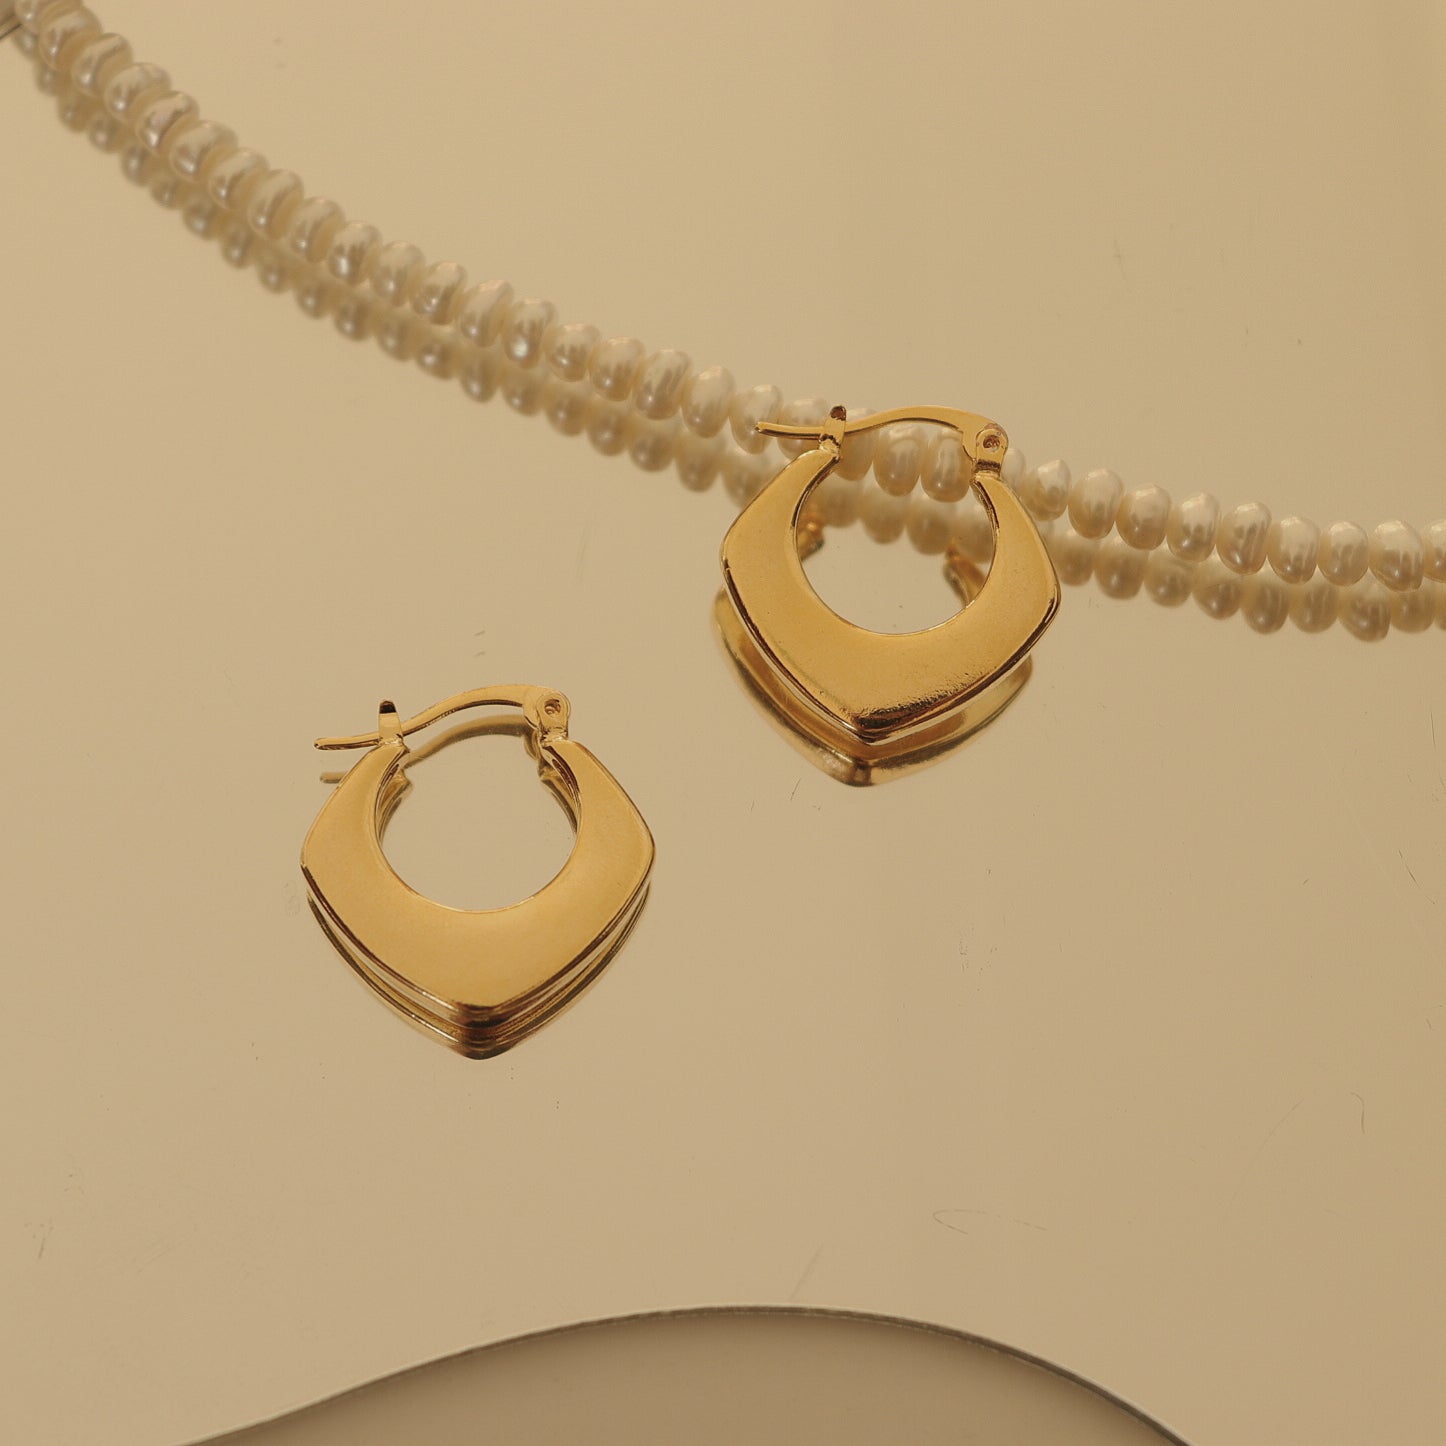 Gold Plated Statement Hoops Earrings - Elevate Your Look with Timeless Elegance